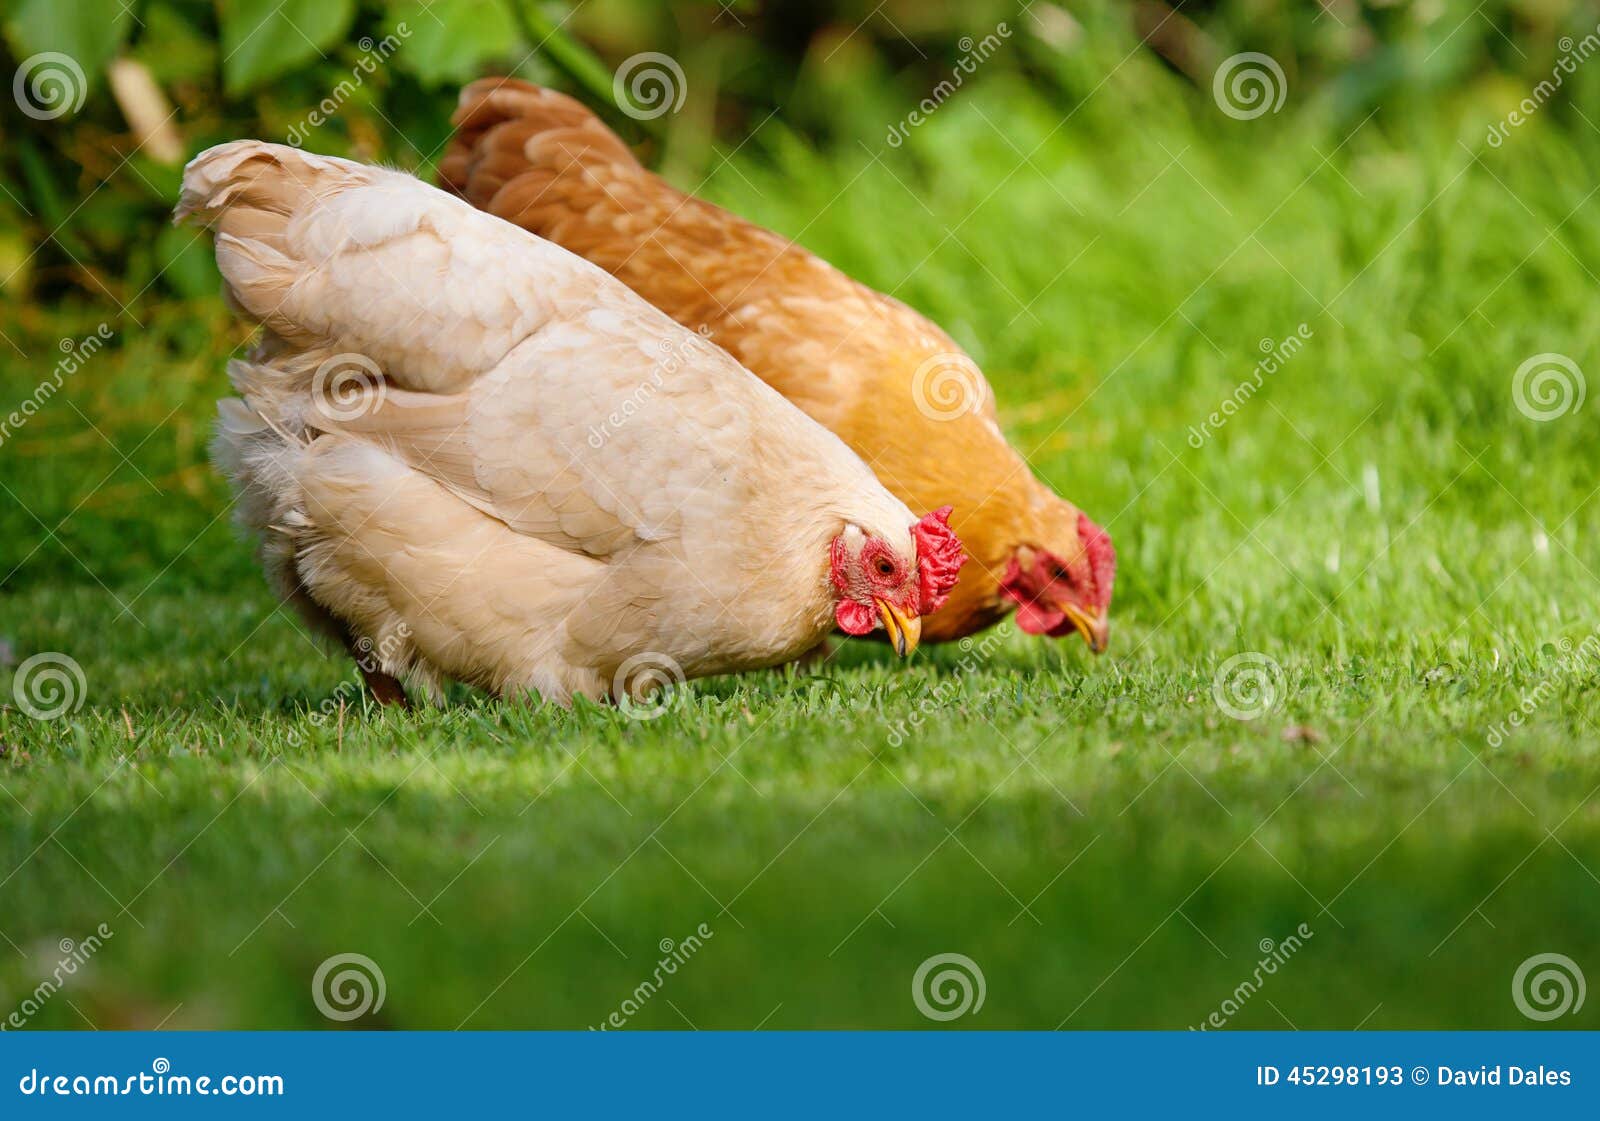 195,499 Hen Stock Photos - Free & Royalty-Free Stock Photos from Dreamstime